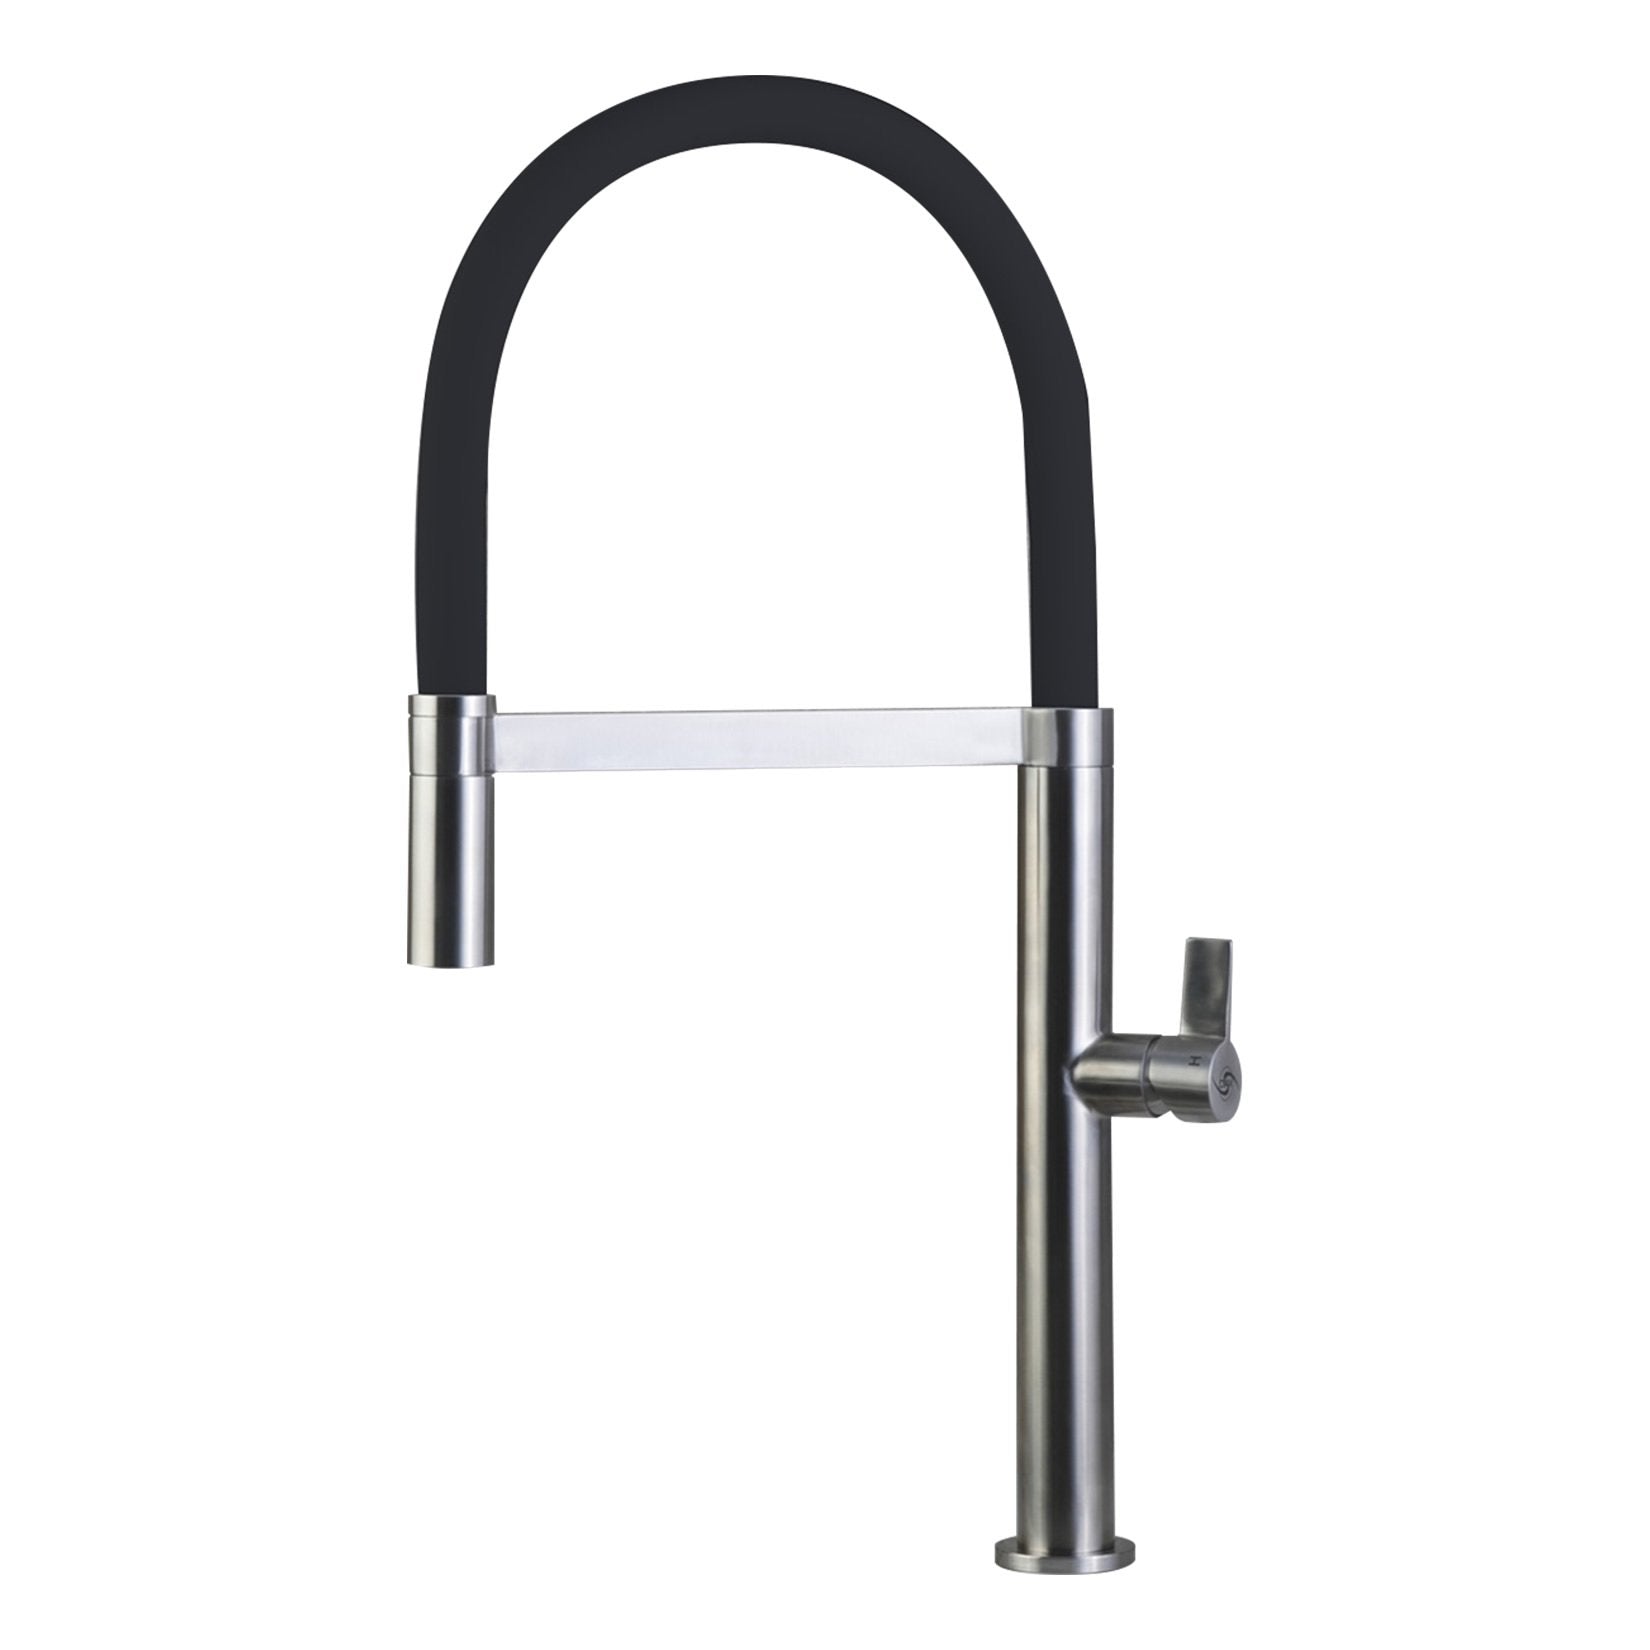 DAX Single Handle Pull Down Kitchen Faucet, Stainless Steel Shower Head and Body, Brushed Finish, Black, Size 8-13/16 x 20-3/8 Inches (DAX-C107B)